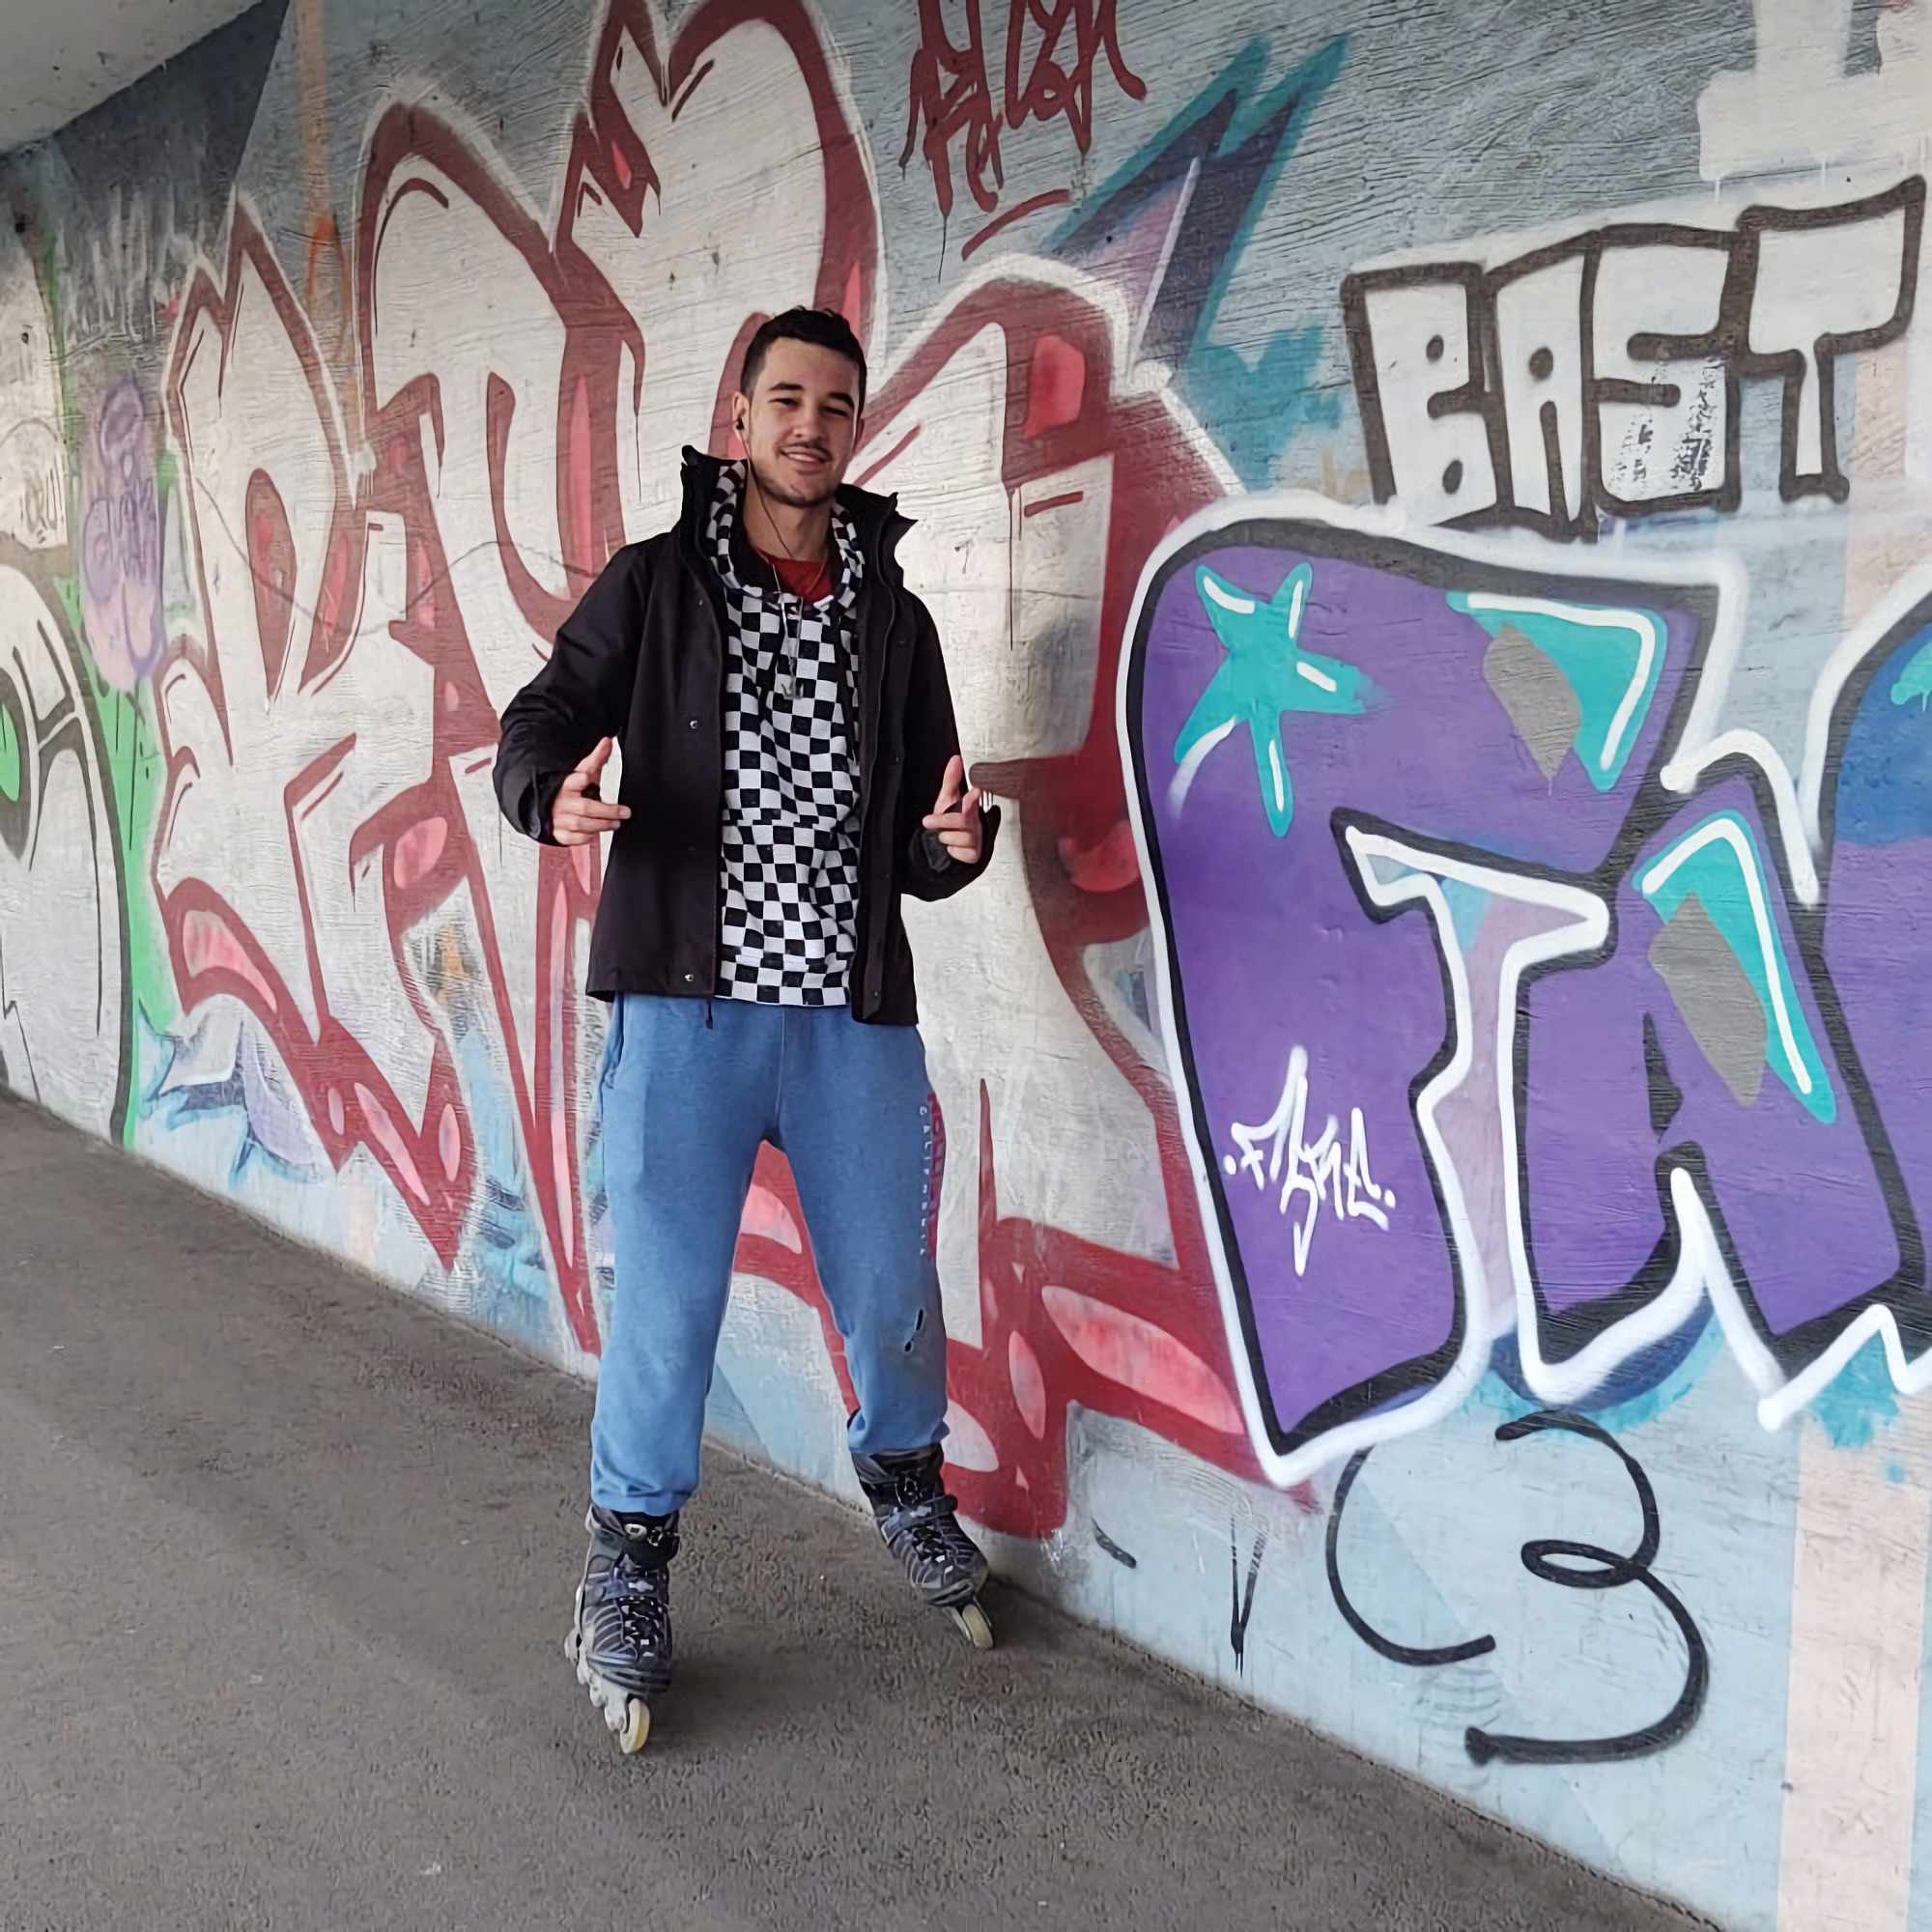 Lucas Goldner with inline skates posing in front of a graffiti wall